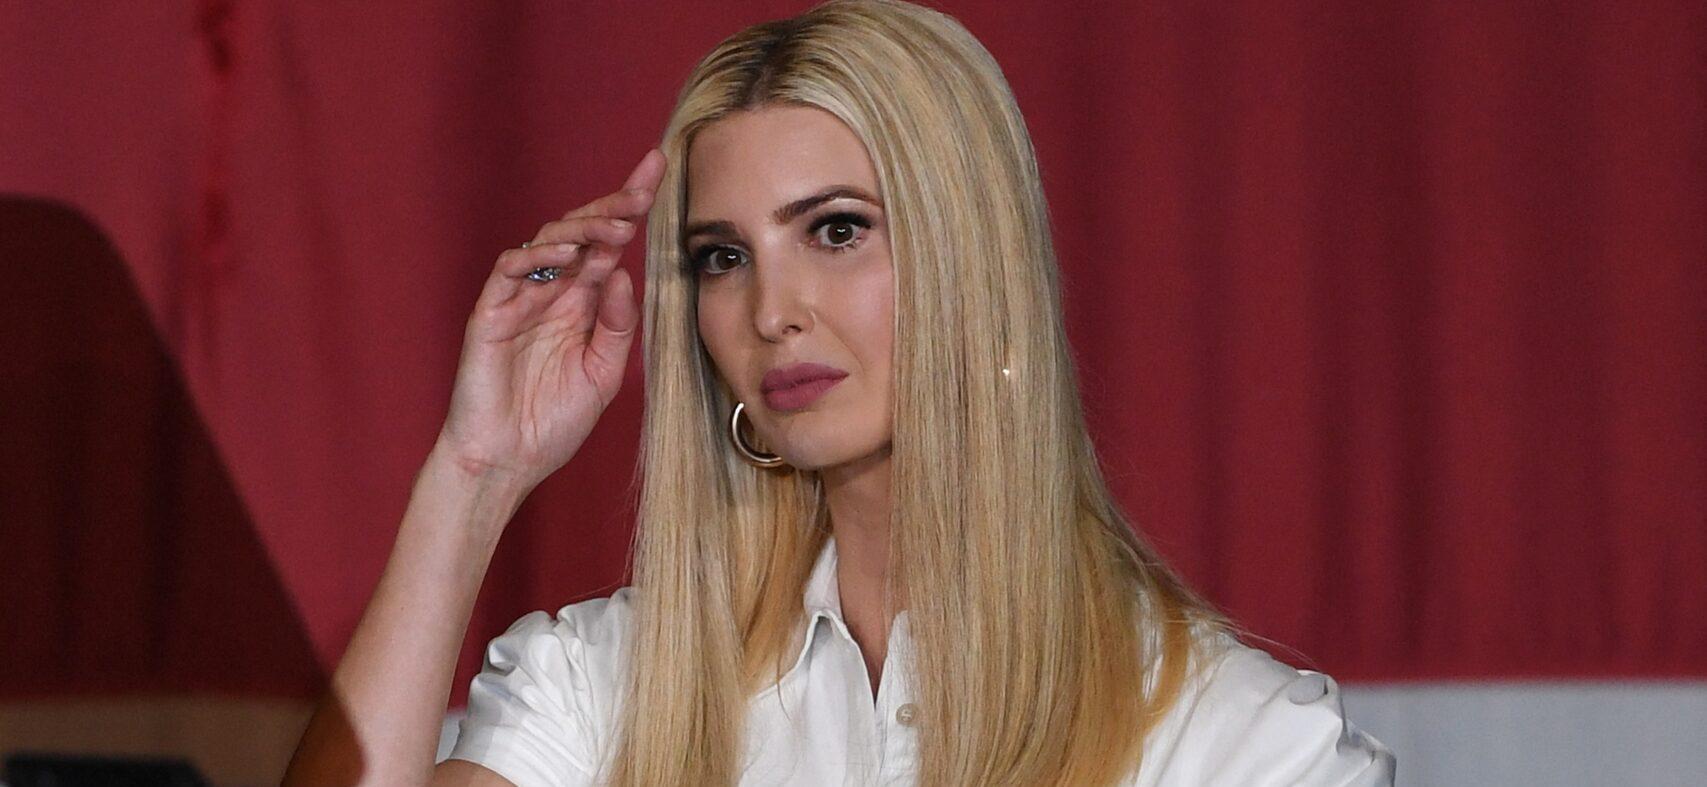 Ivanka Trump Is Fighting Subpoena To Avoid Testifying Against Her Father